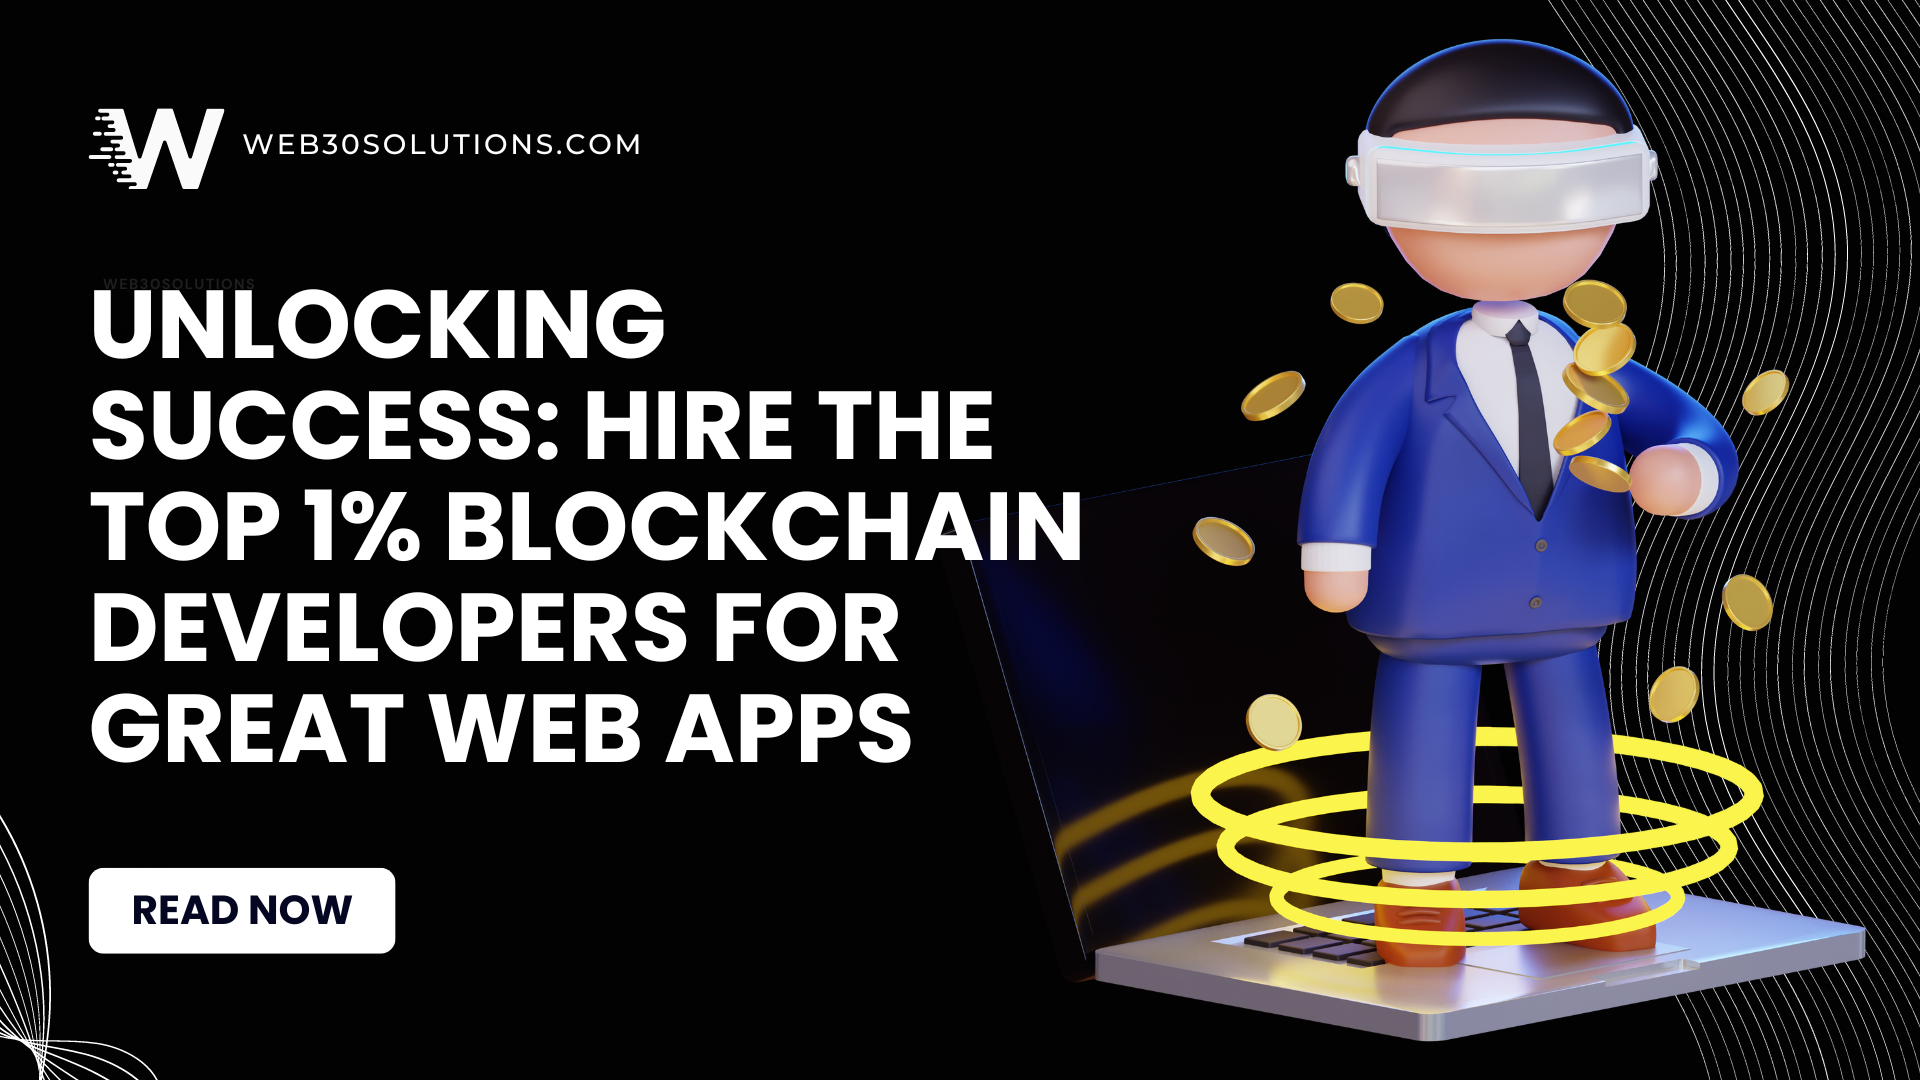 Unlocking Success: Hire the Top 1% Blockchain Developers for Great Web Apps